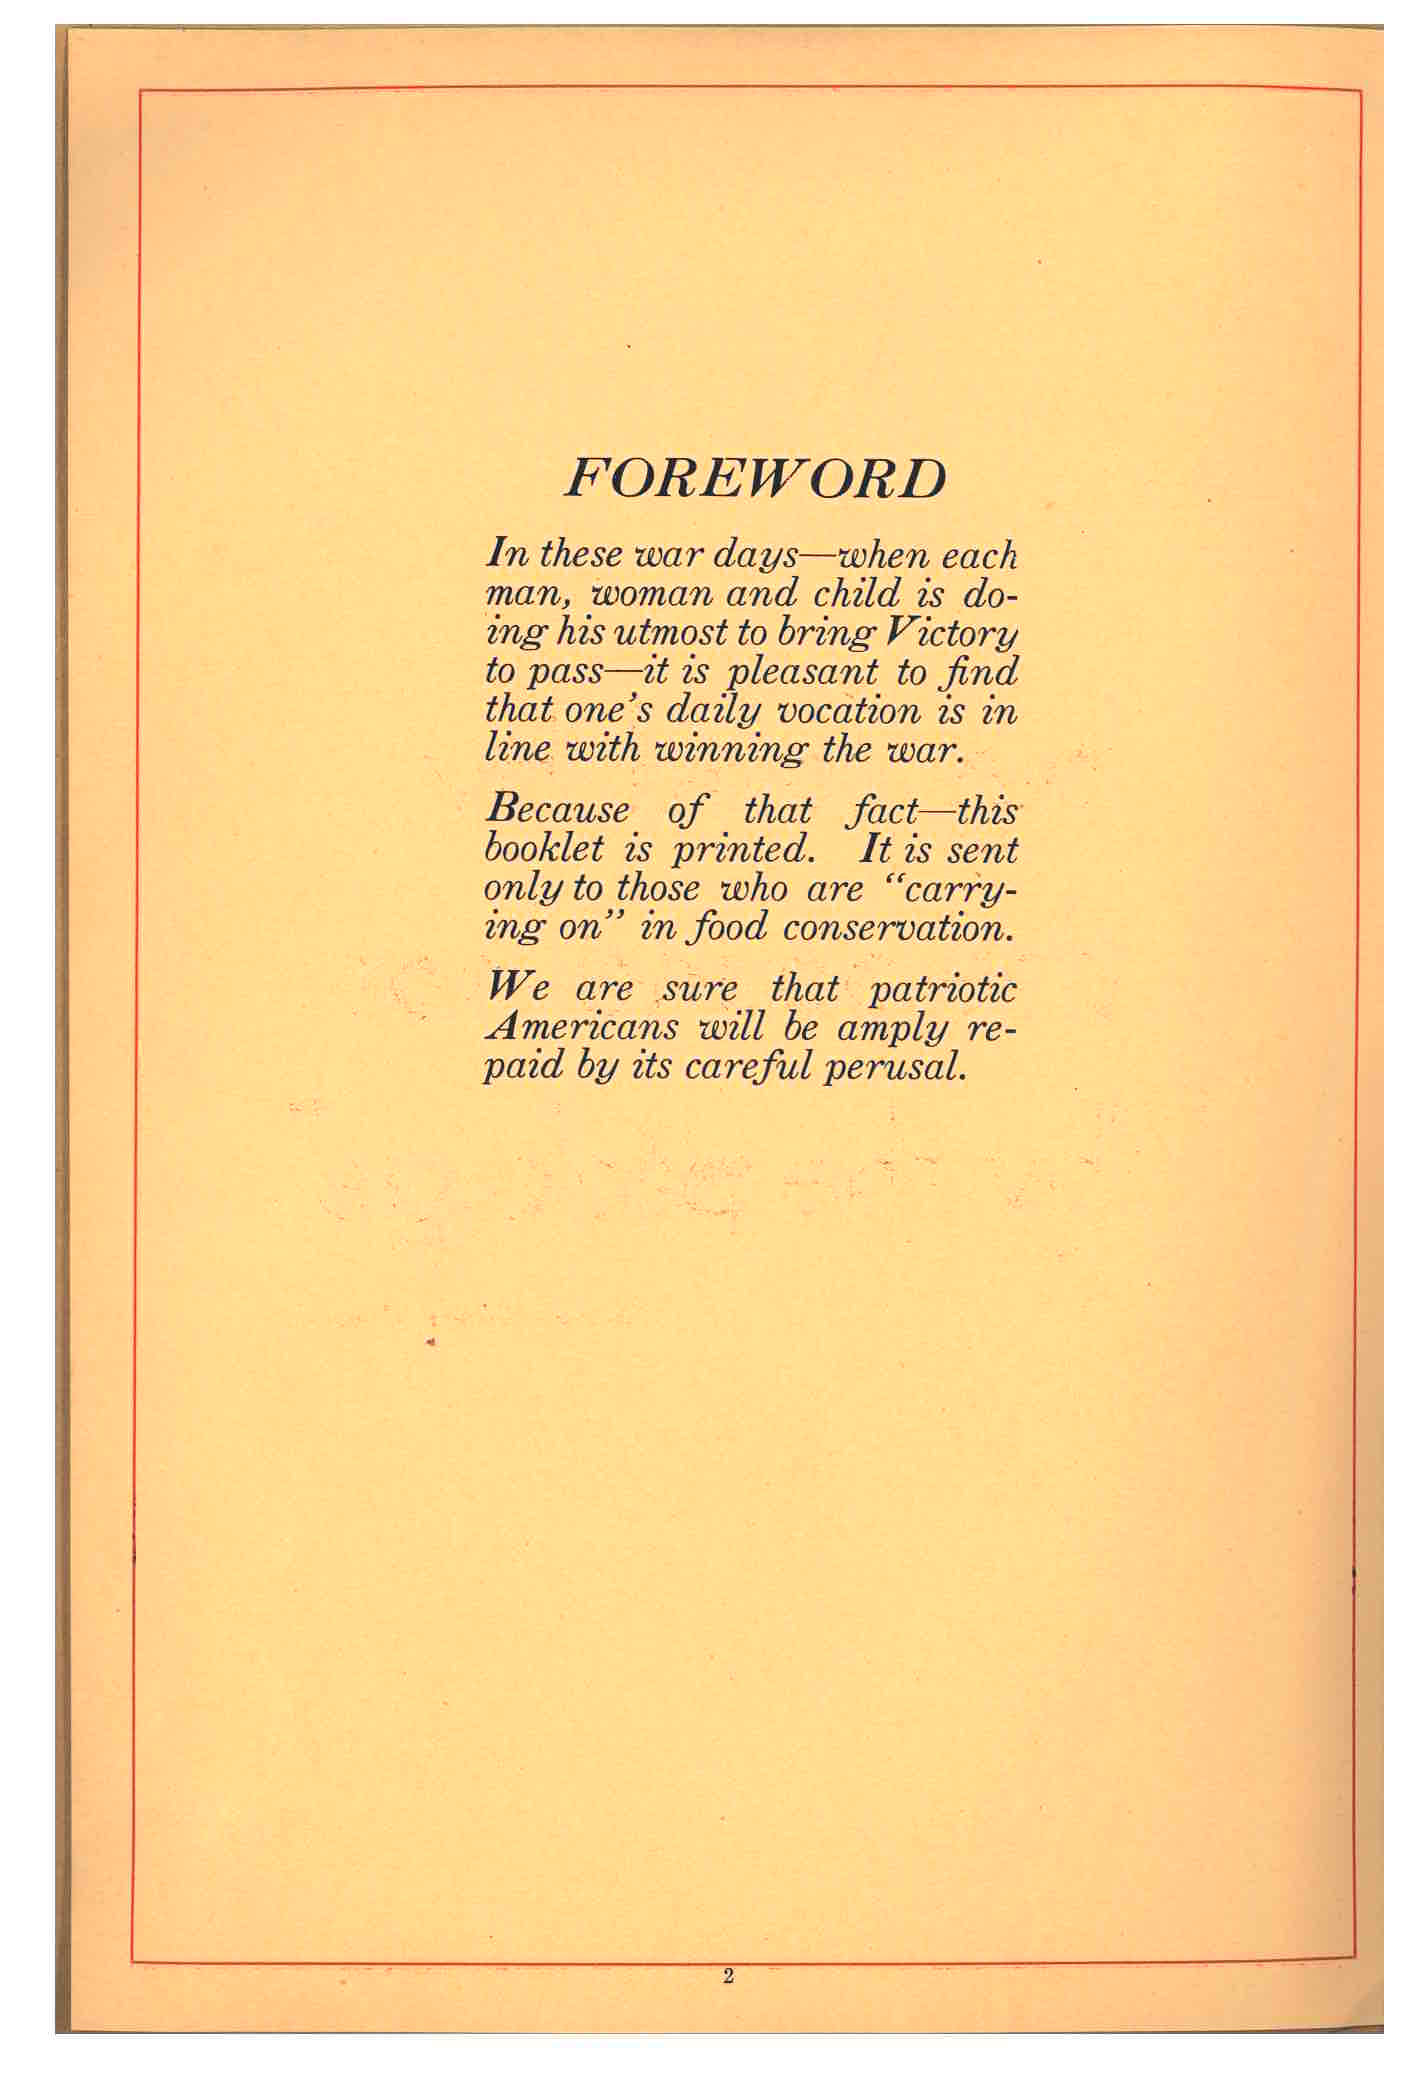 foreword of the trade catalog